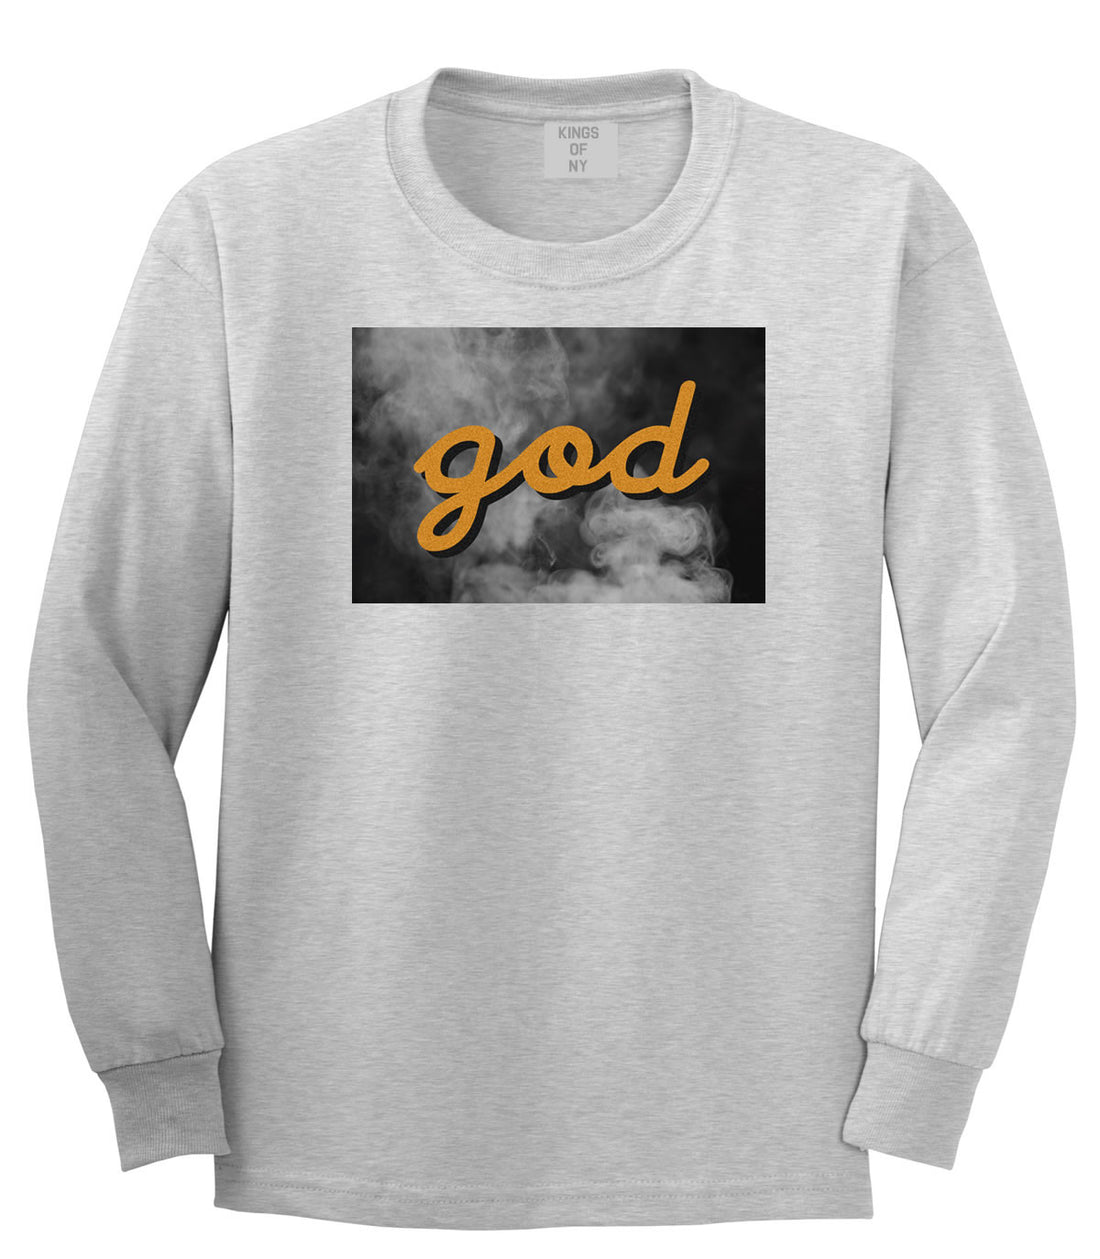 God Up In Smoke Puff Goth Dark Long Sleeve T-Shirt in Grey By Kings Of NY